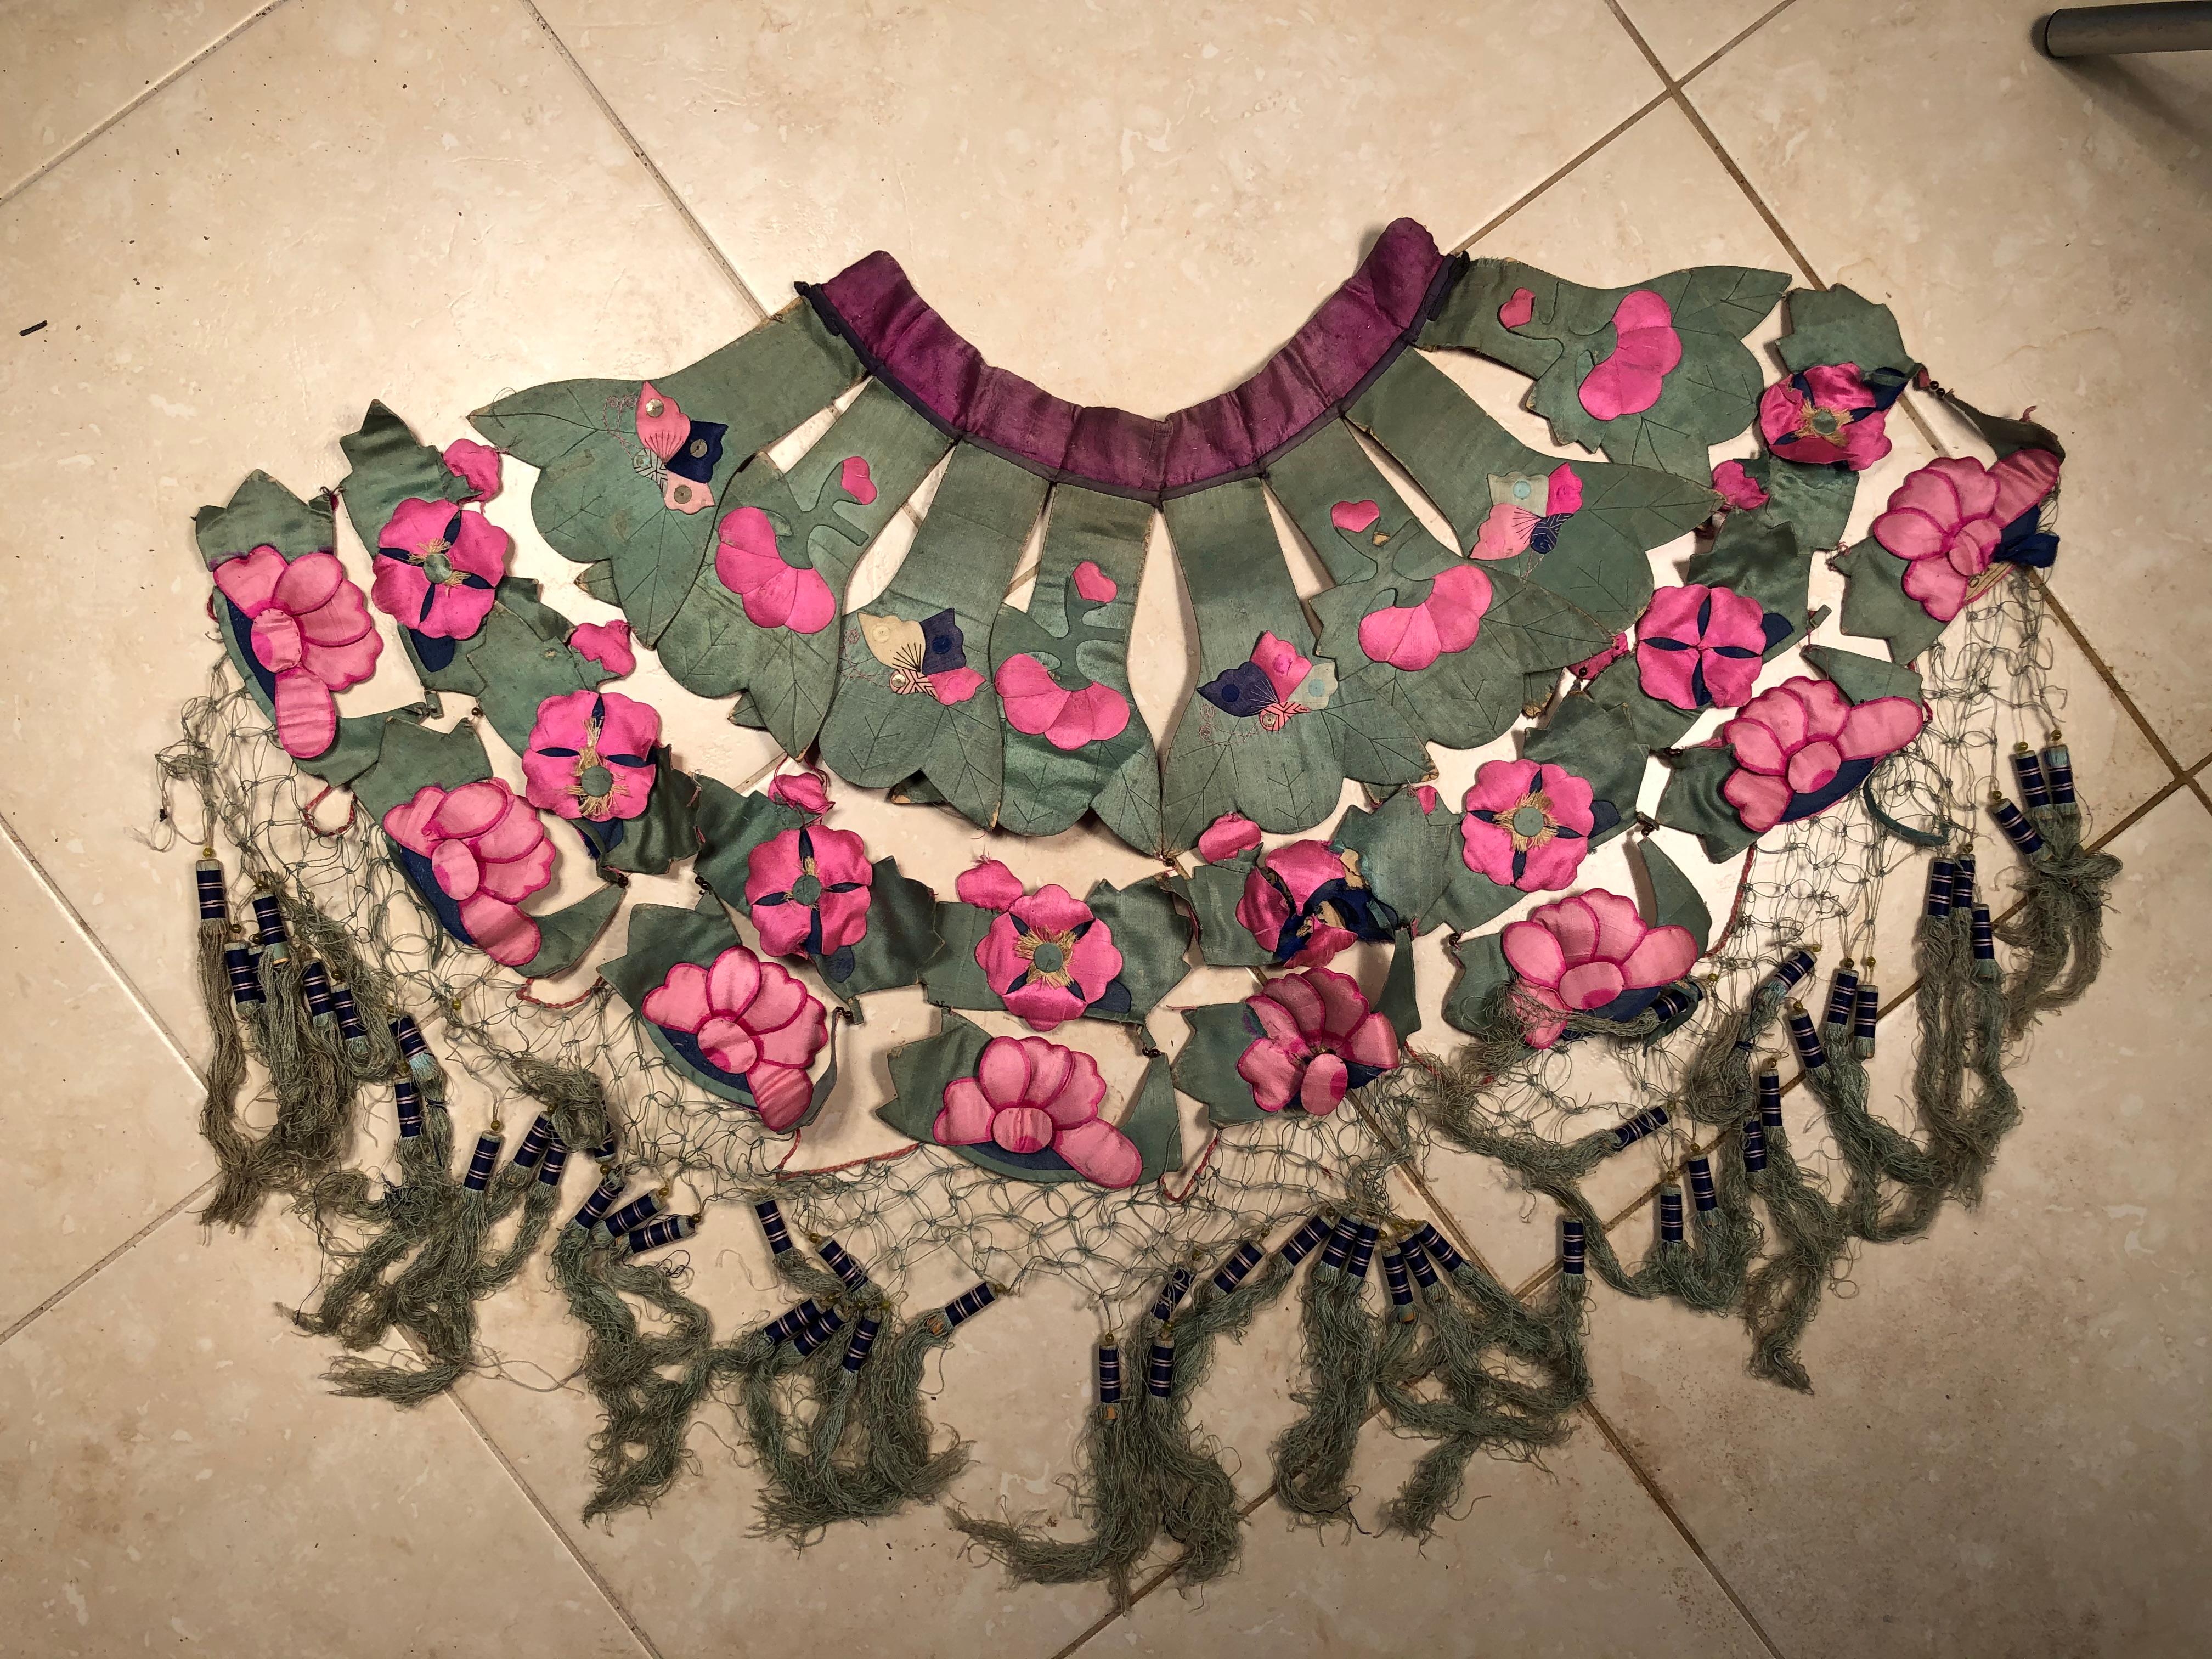 An opportunity to acquire a lovely antique Chinese hand sewn fancy collar textile pieced together in four wing like sections, all in vibrant pink and colors. 

Immediately wearable or frameable.

Dimensions: 26 inches by 36 inches tall and 3 inches